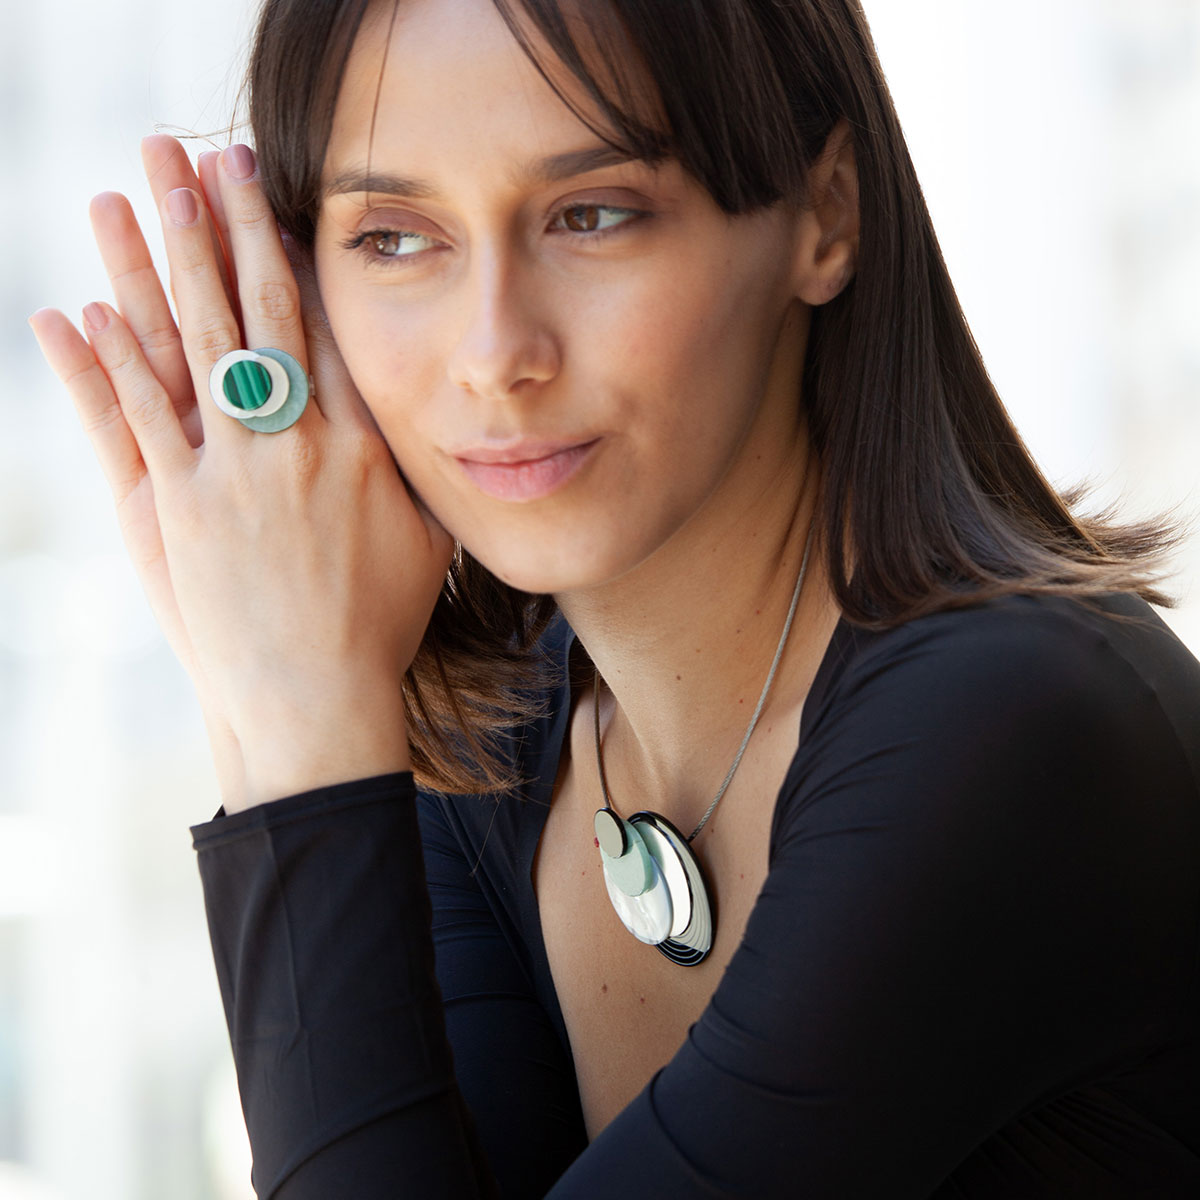 handmade Aka ring in sterling silver, amazonite, mother-of-pearl and malachite designed by Belen Bajo m1